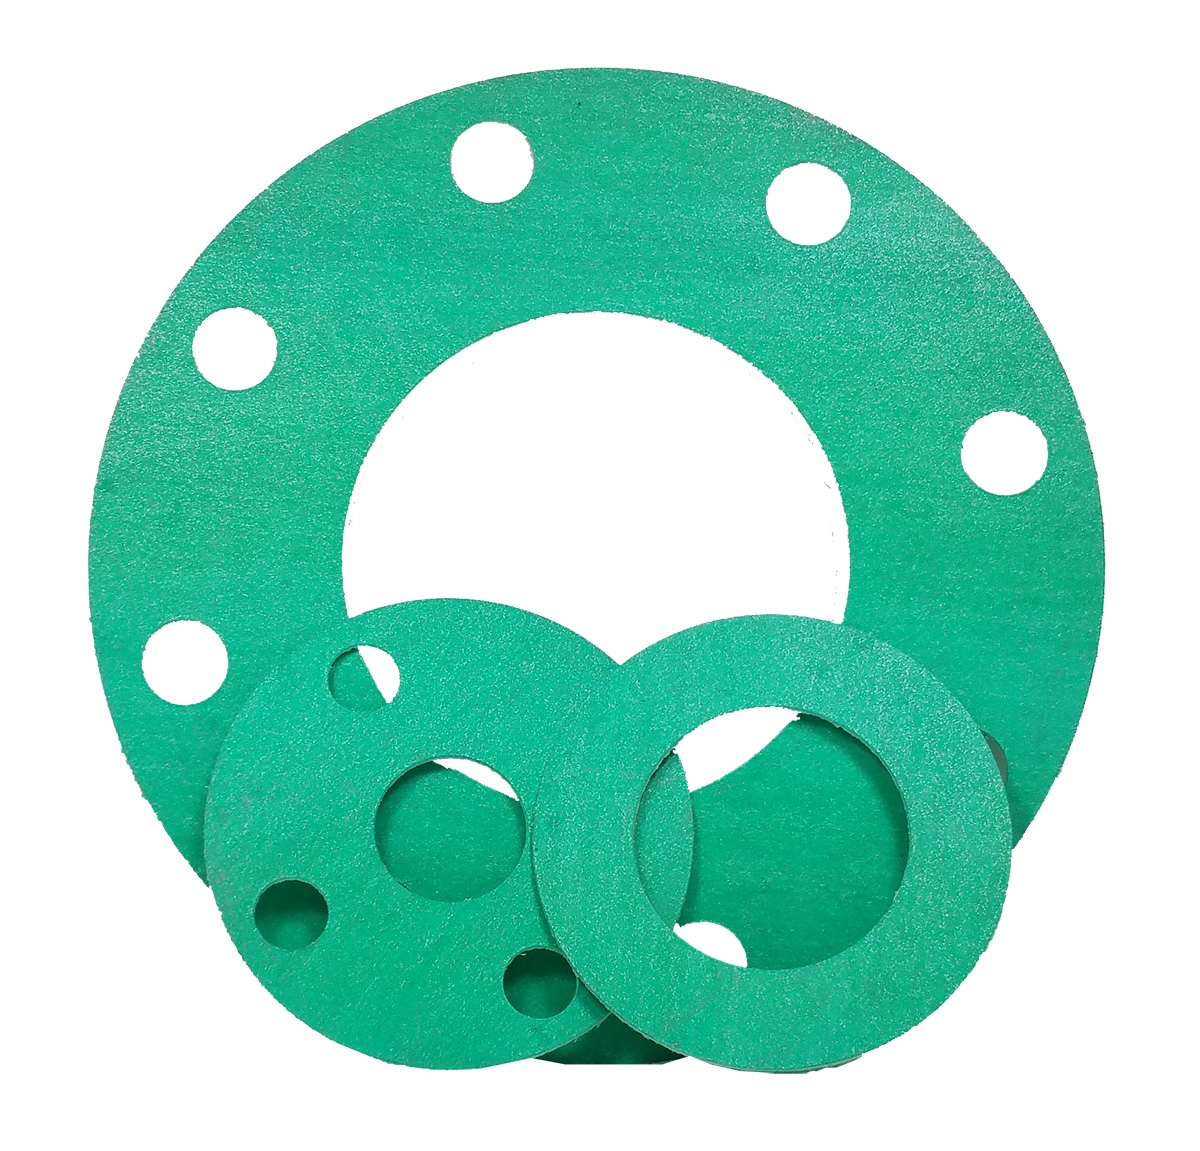 Pressure Class 300# 1 Pipe Size Full Face Gasket Pack of 10 Aramid Fibers/Nitrile Rubber Sterling Seal CFF7001.100.062.300X10 7001 Compressed Non-Asbestos 1/16 Thick 1.312 ID 